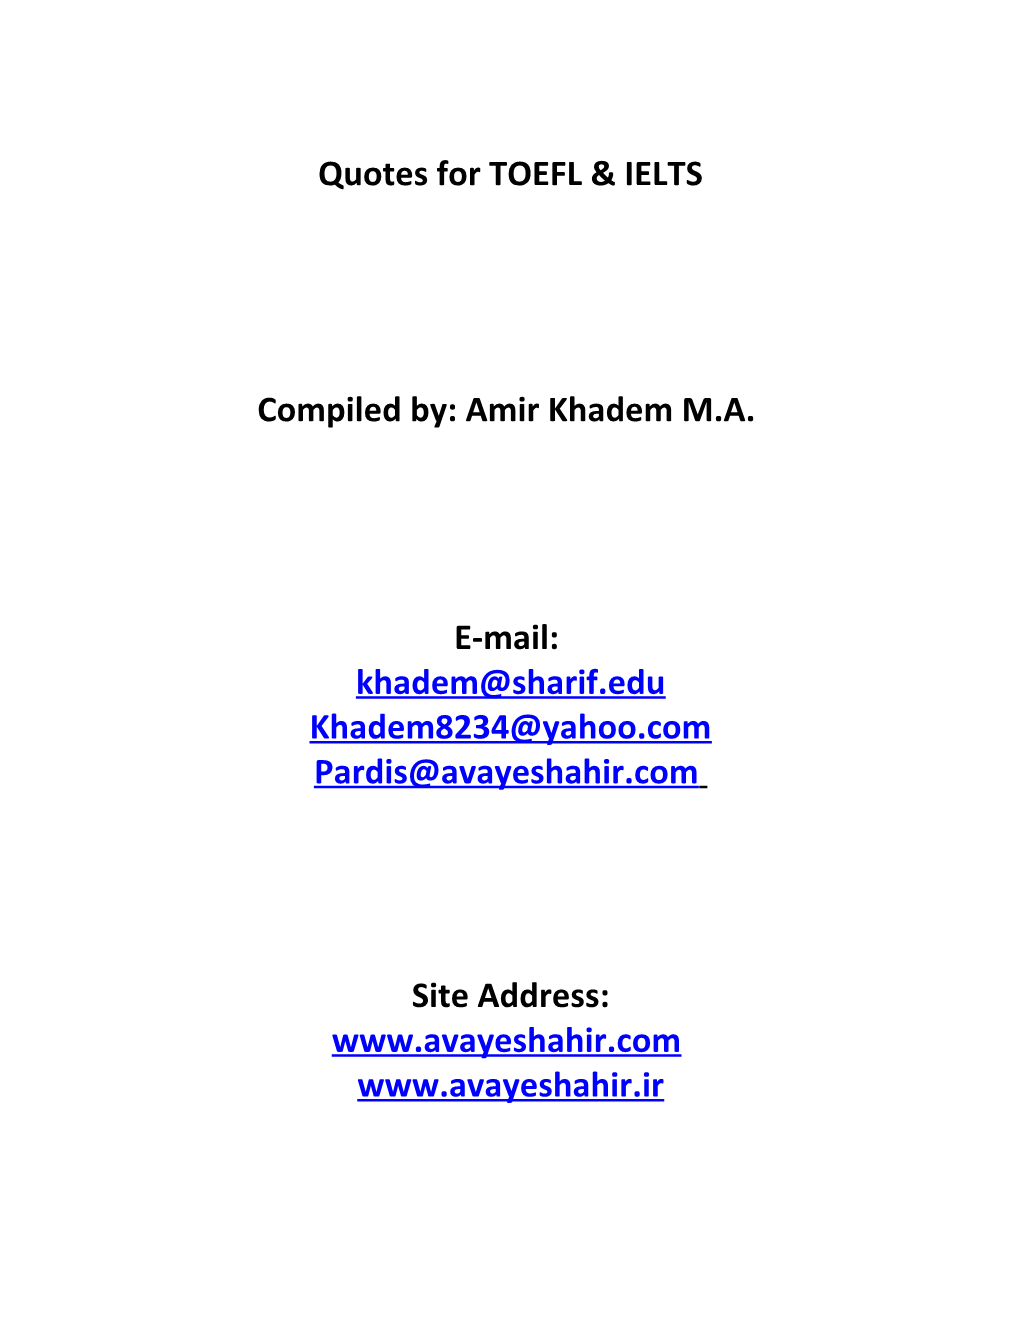 Quotes for TOEFL & IELTS